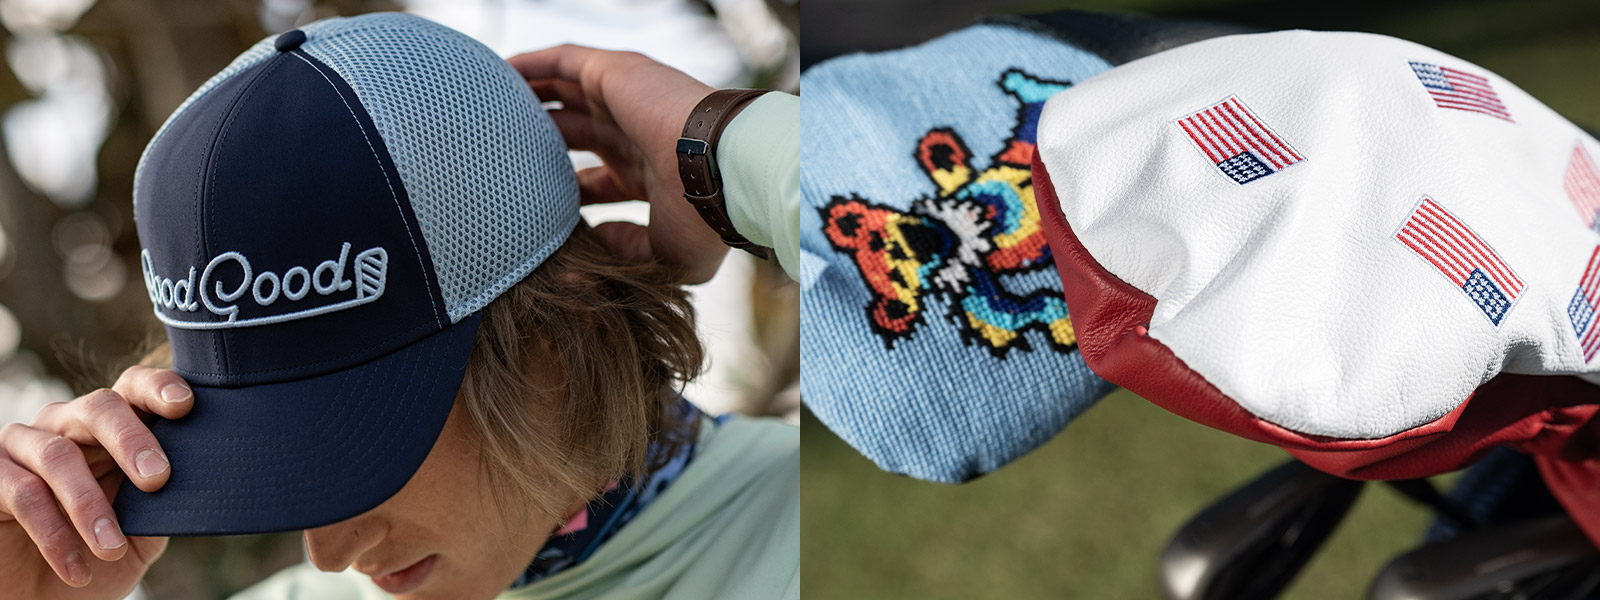 A Good Good Golf hat and a pair of headcovers.